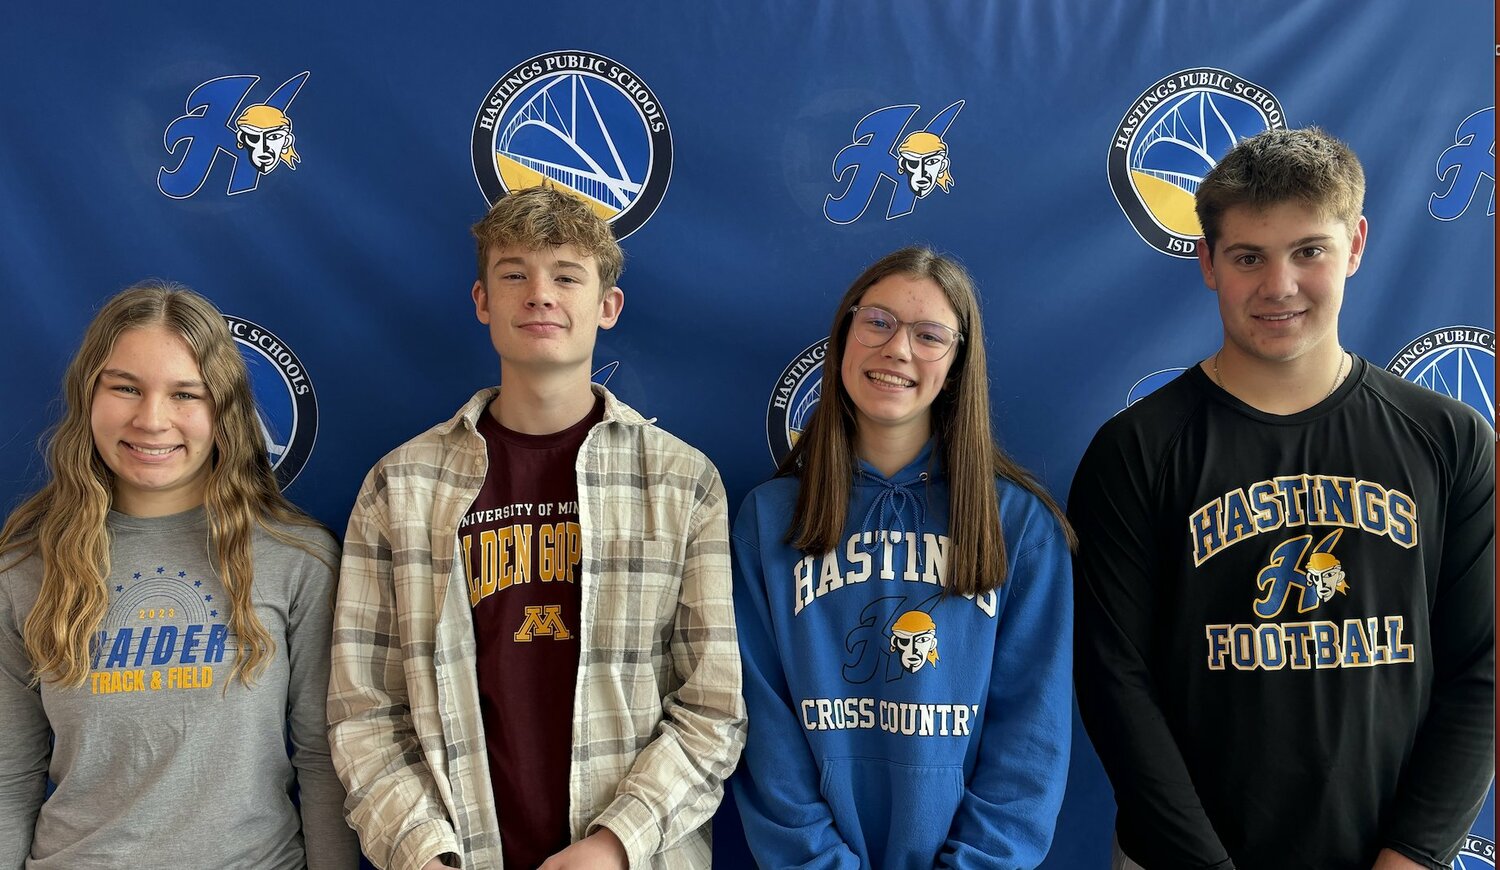 Hastings High School students Mikayla Schuster, Noah Quigley, Sienna McCoy and Lukas Foss were recognized with MSHSL awards.